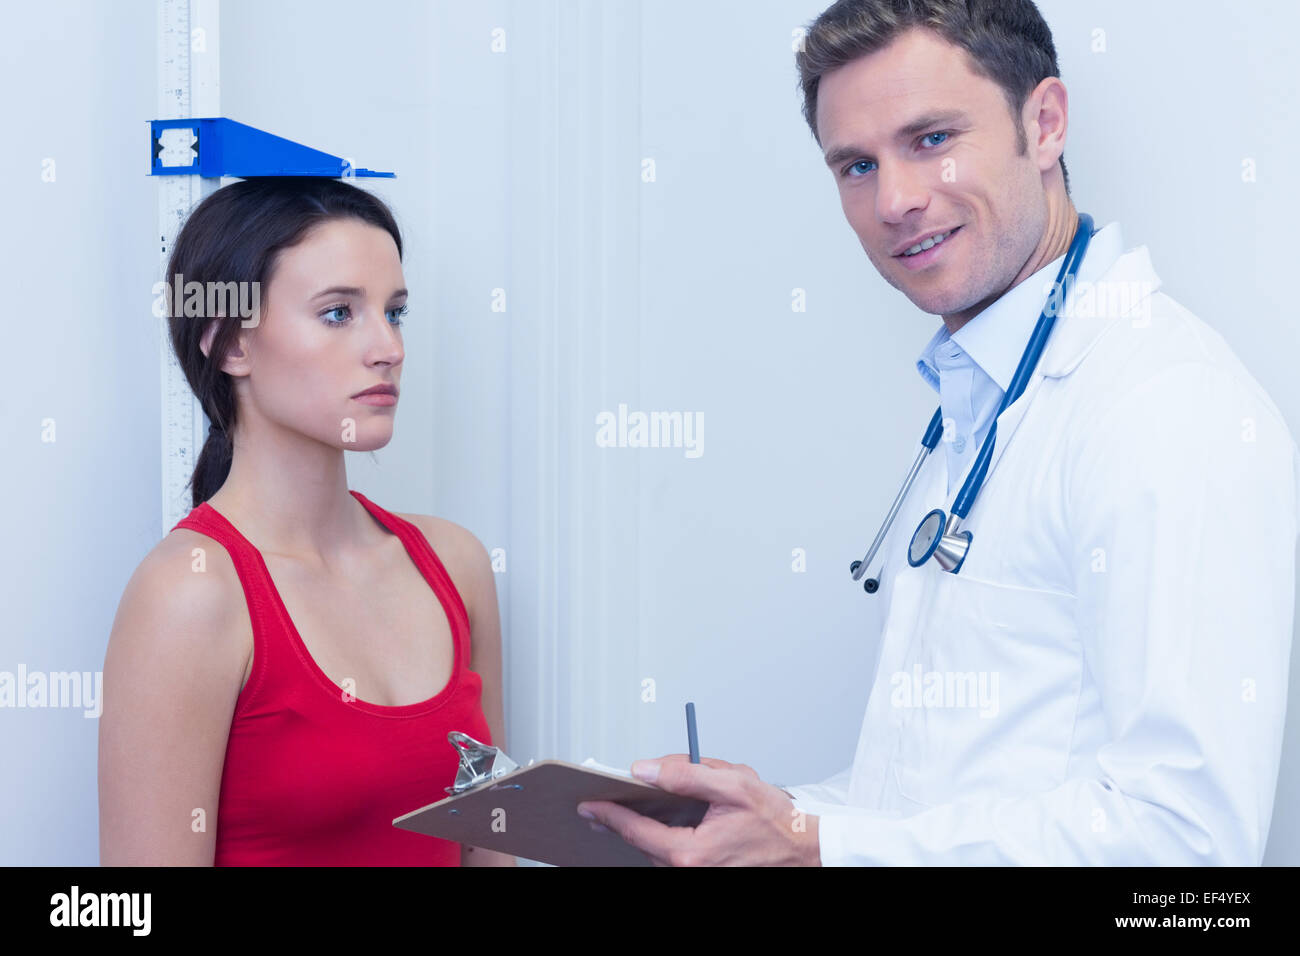 Smiling doctor standing in front of a serious patient Stock Photo